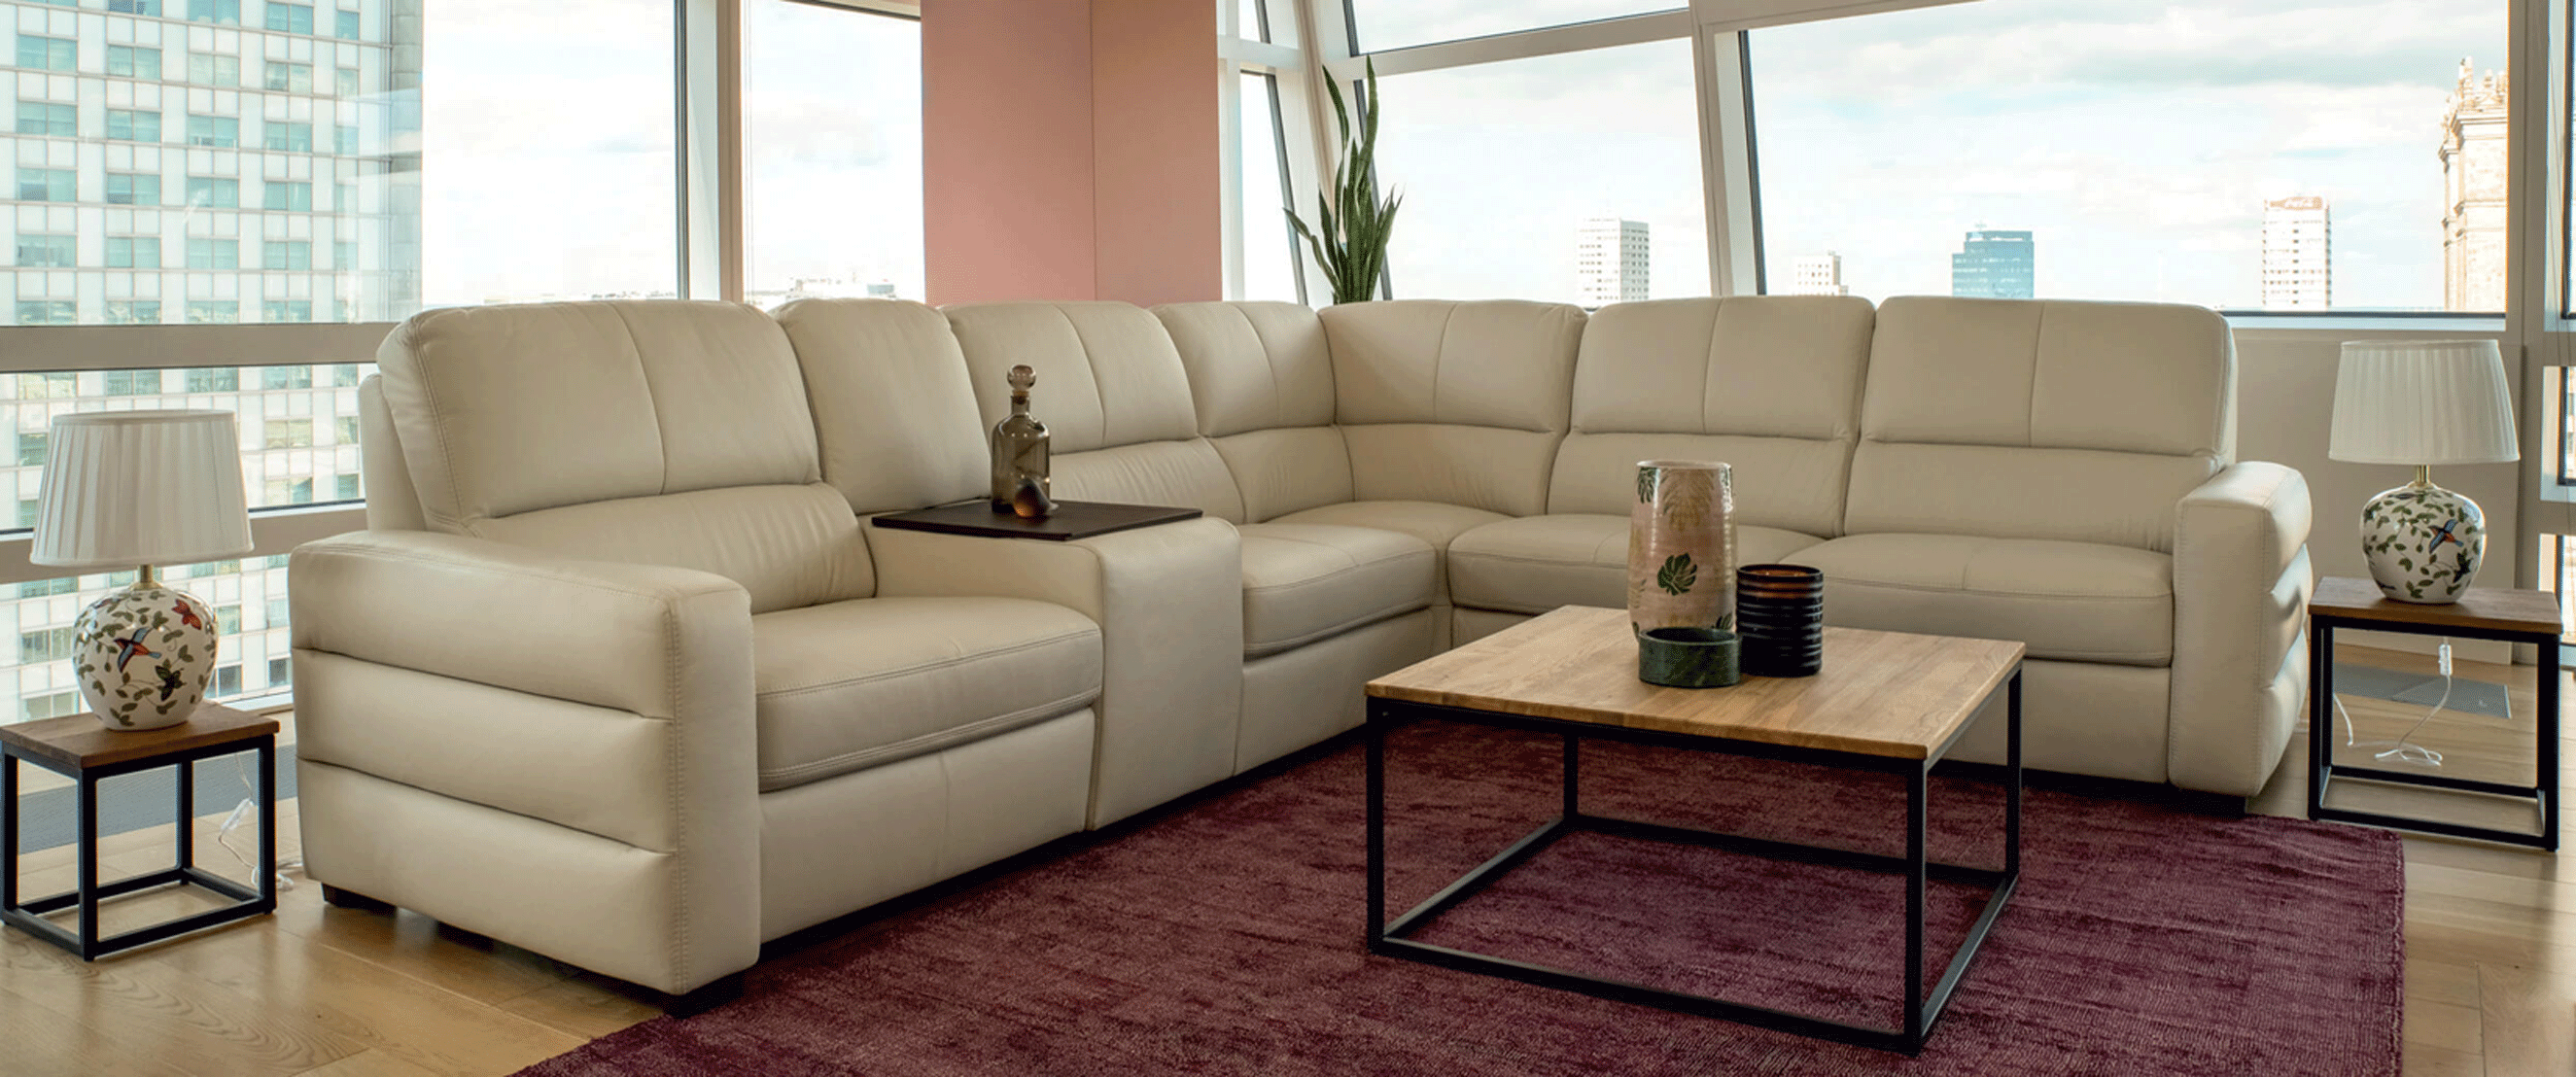 Living Room Furniture Coffee and End Tables Karten Sectional